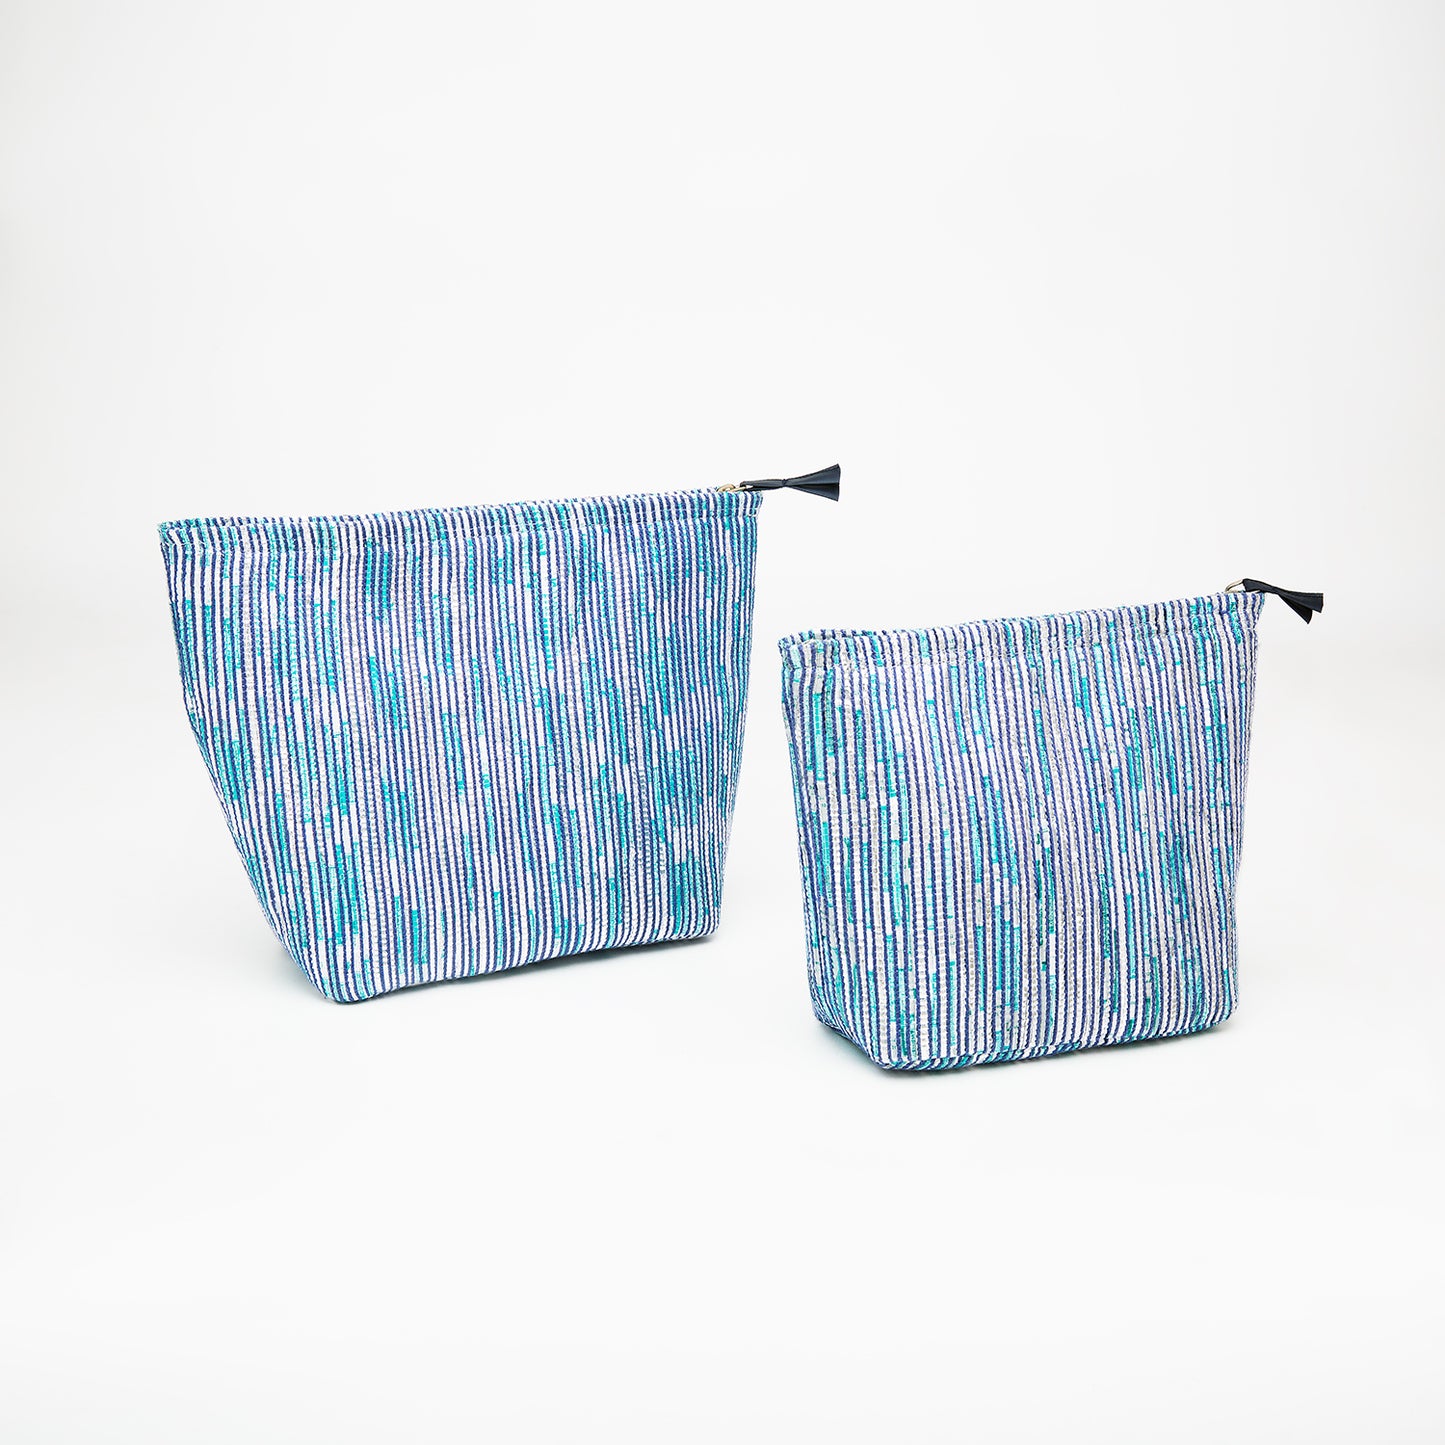 Recycled Plastic Toiletry Pouch Set of 2 (Multi Layered Packing)